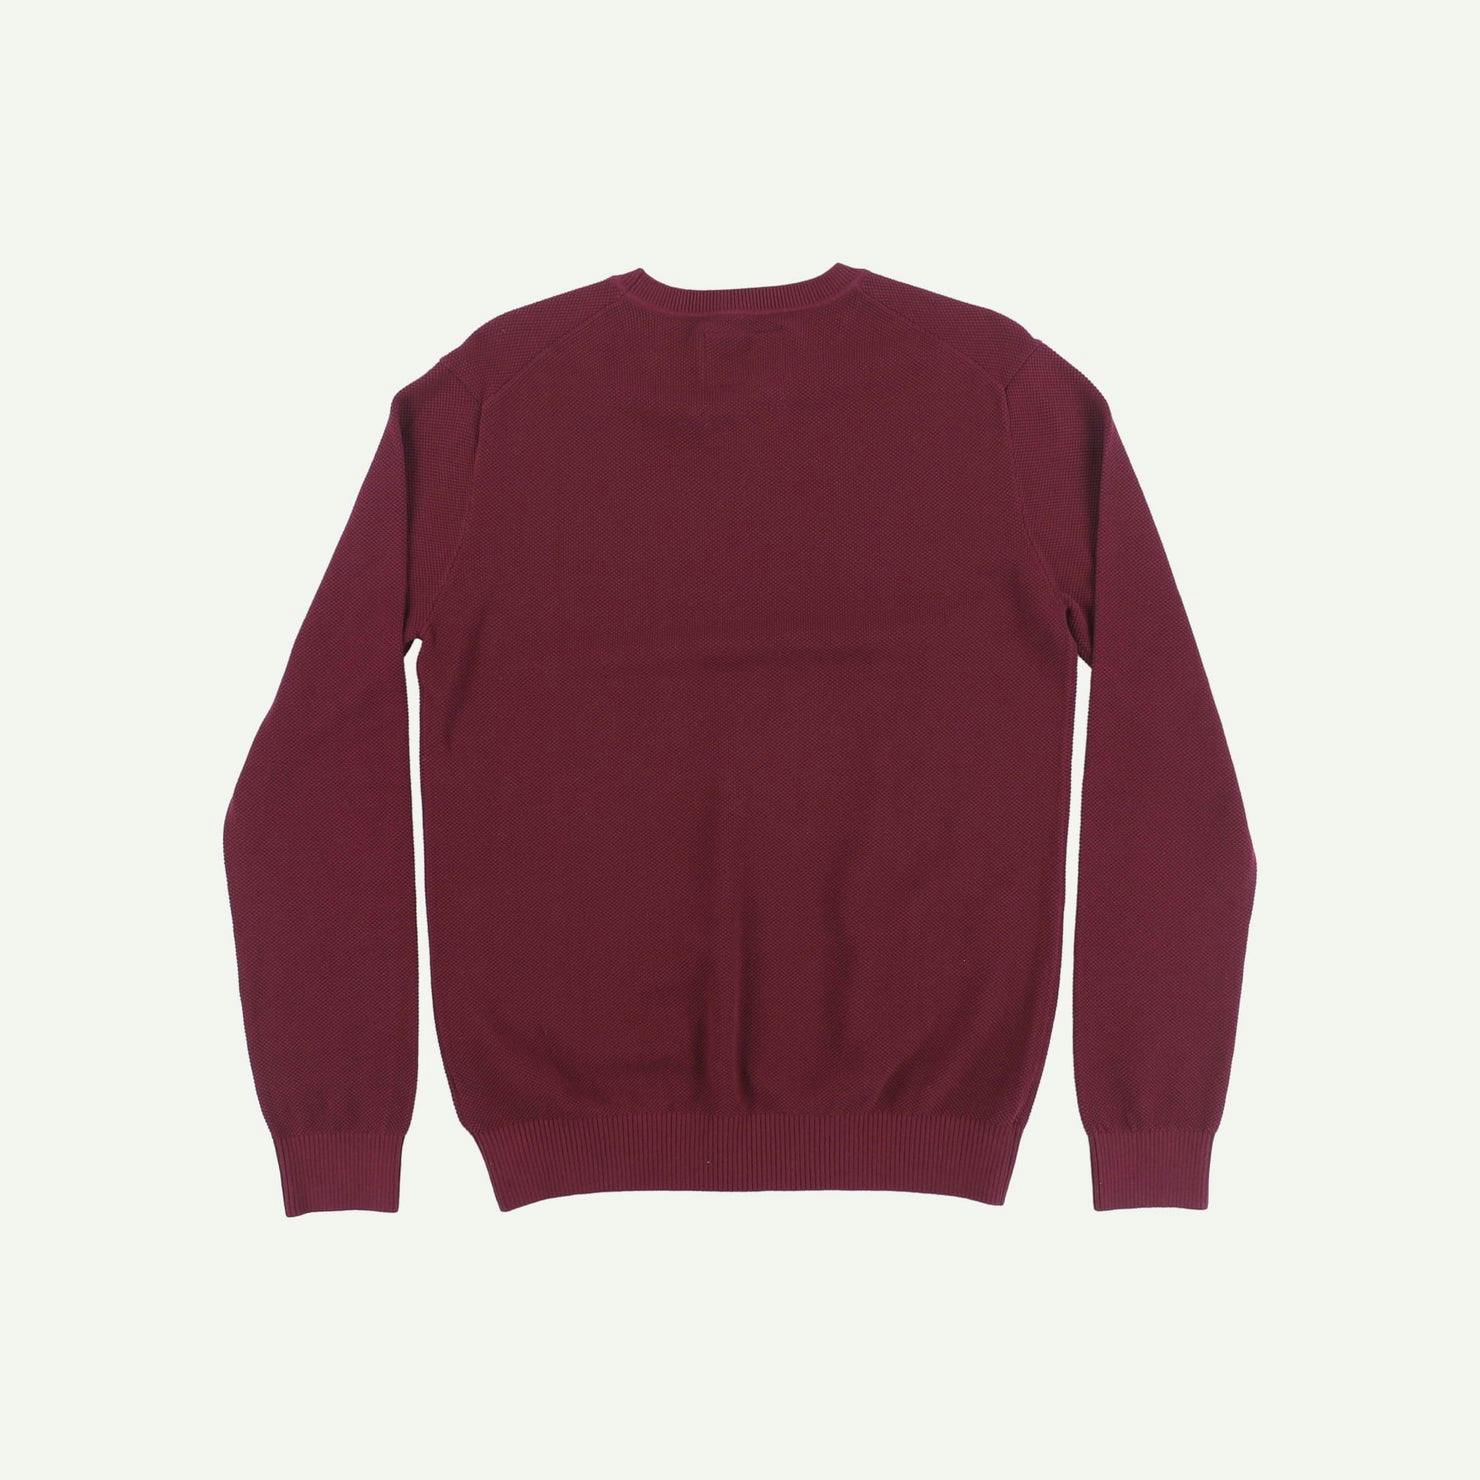 Joules As new Burgundy Jumper